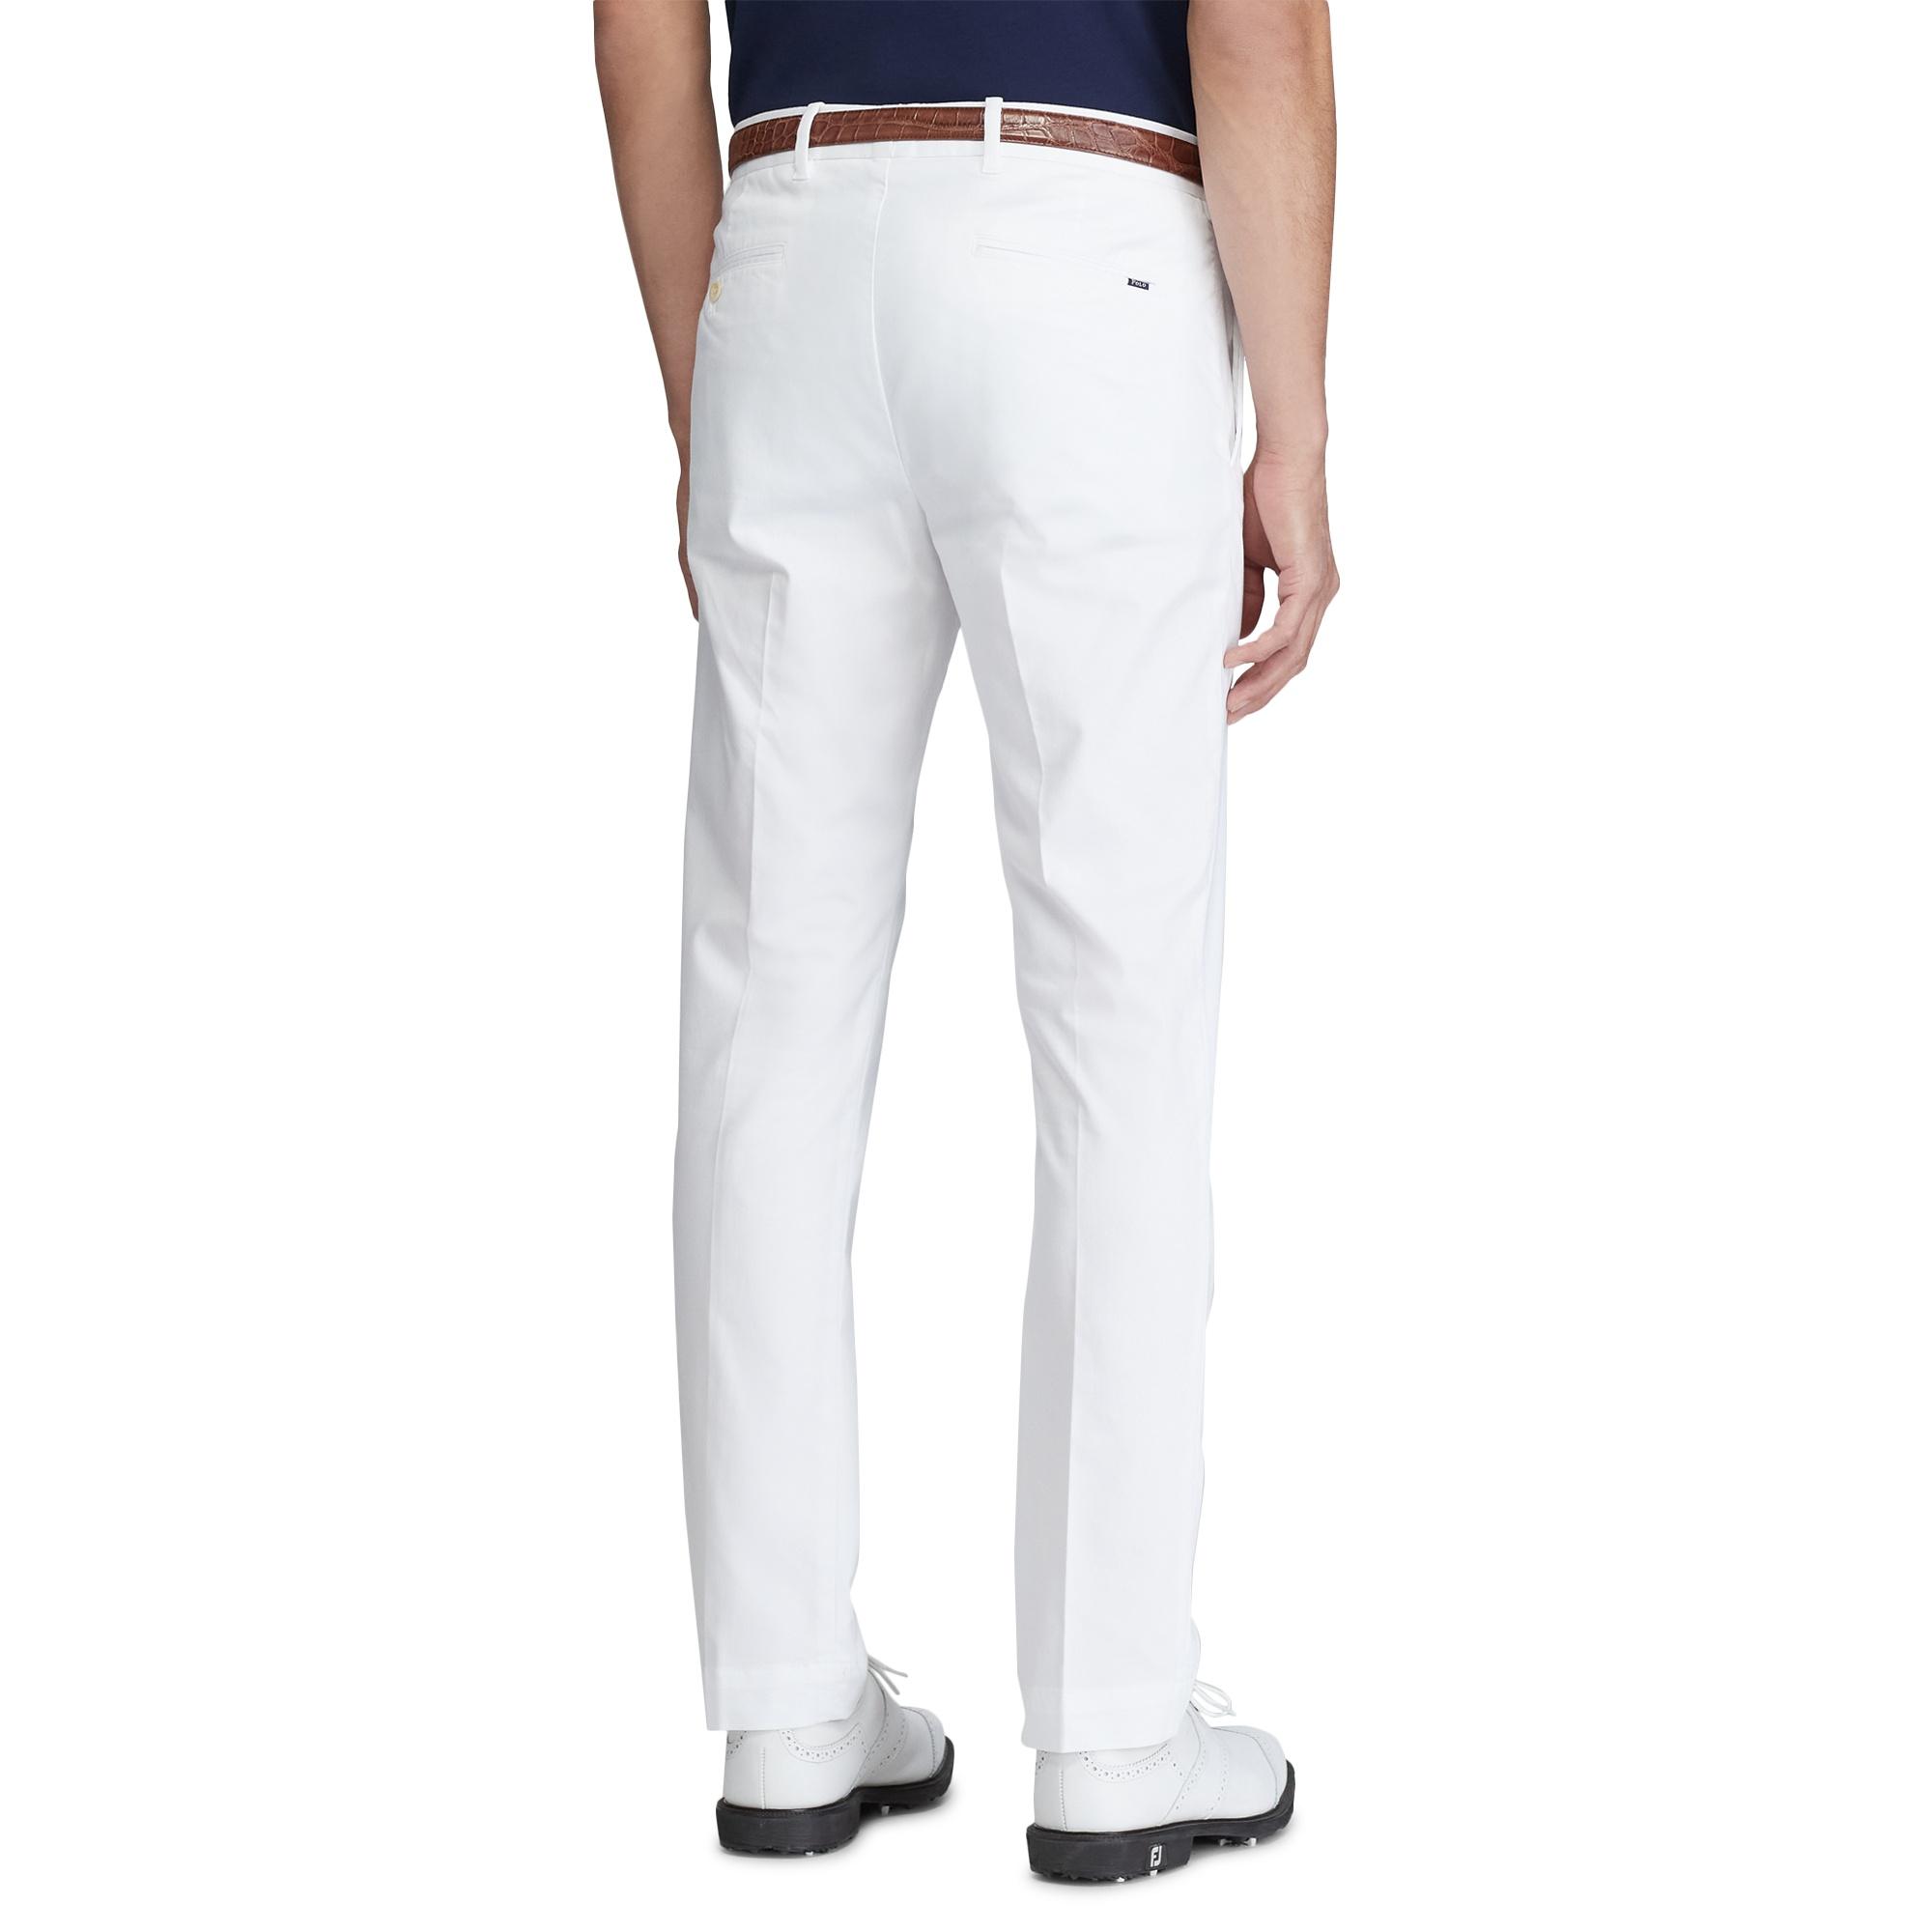 Ralph Lauren Cotton Slim Fit Stretch Chino Pant in White for Men - Lyst